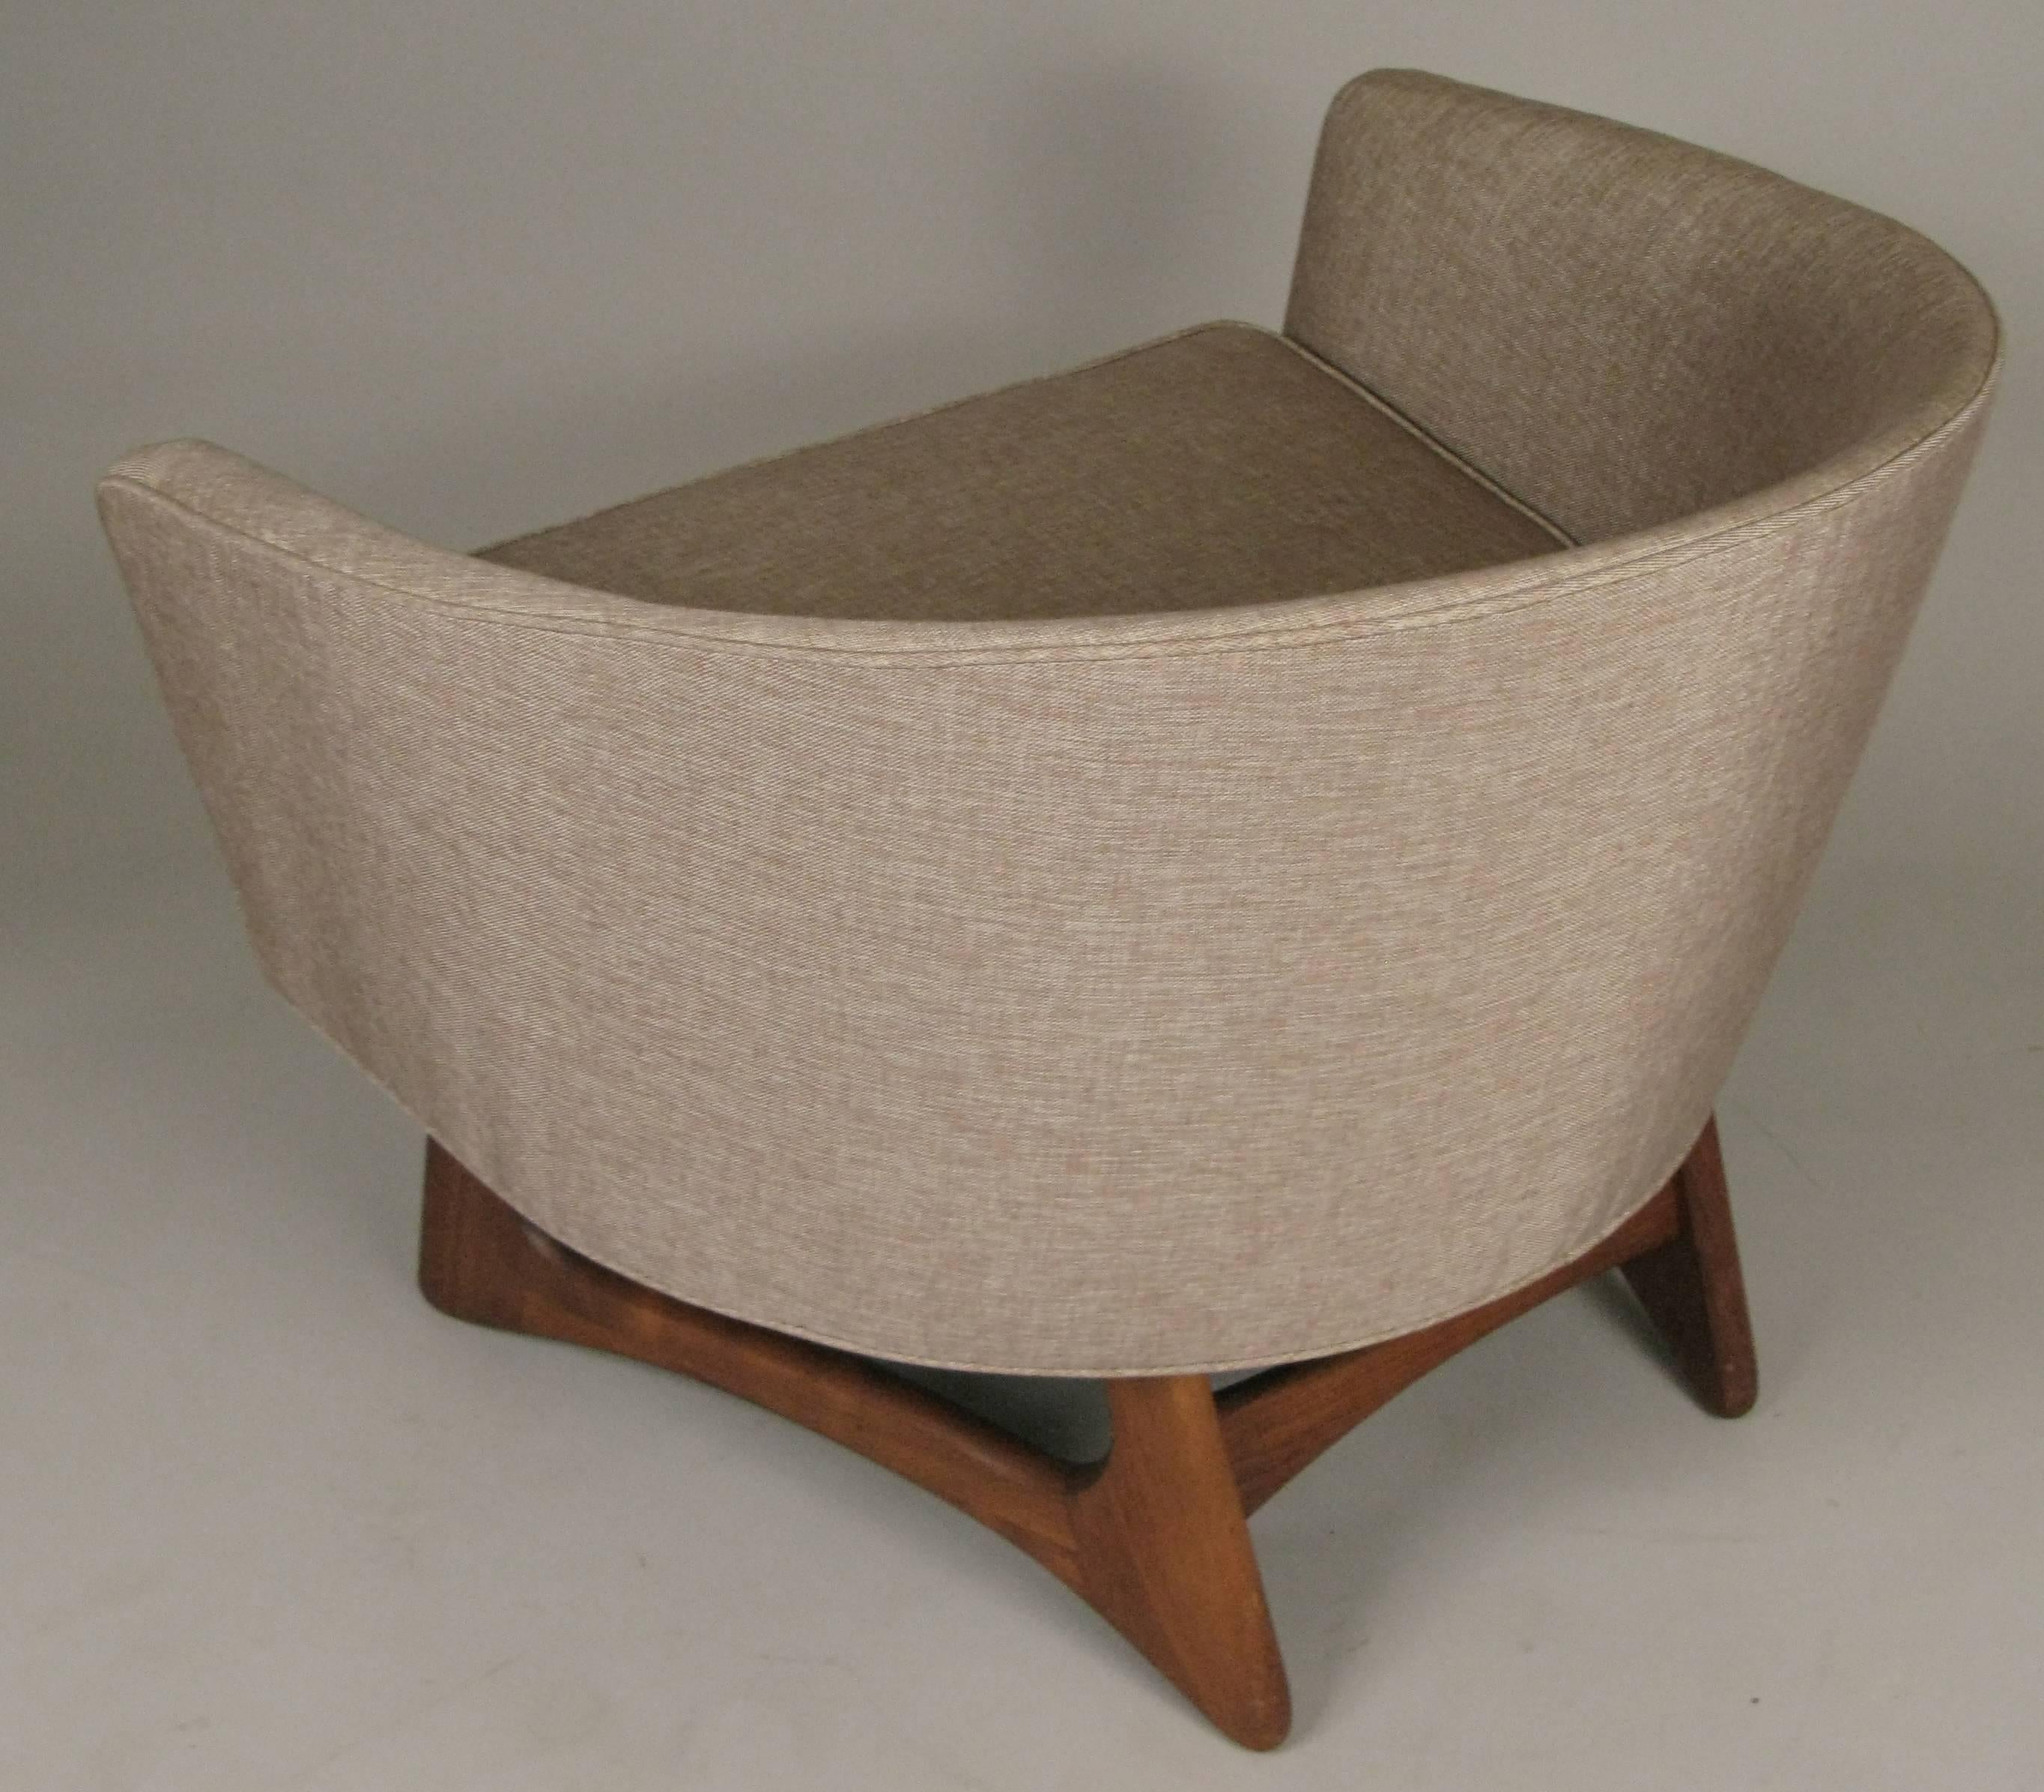 A beautiful vintage 1960s curved back lounge chair with a sculptural walnut base designed by Adrian Pearsall for Craft Associates. Wonderful design and very comfortable, just reupholstered in a light beige woven fabric. Perfect condition.